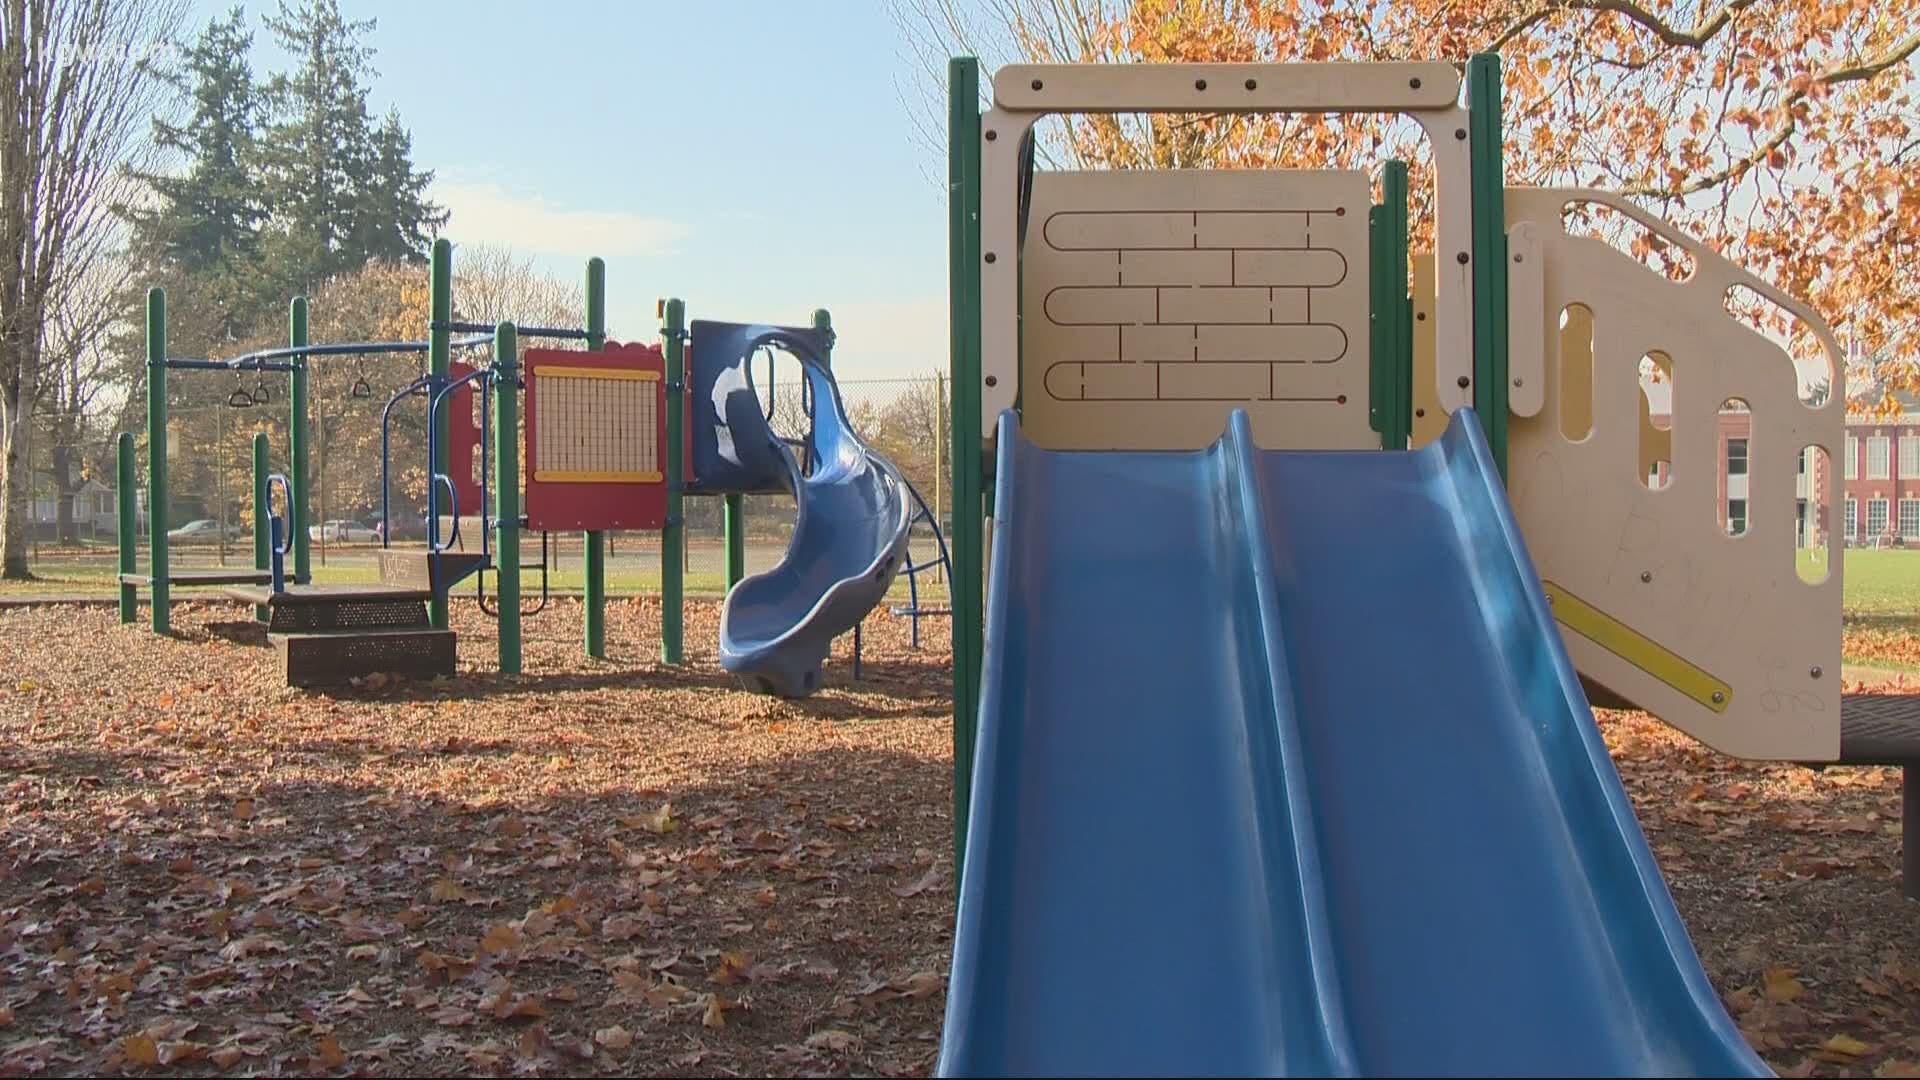 Fields and playgrounds at Portland Public Schols have been closed because of COVID-19. Now, there's a push to reopen them.